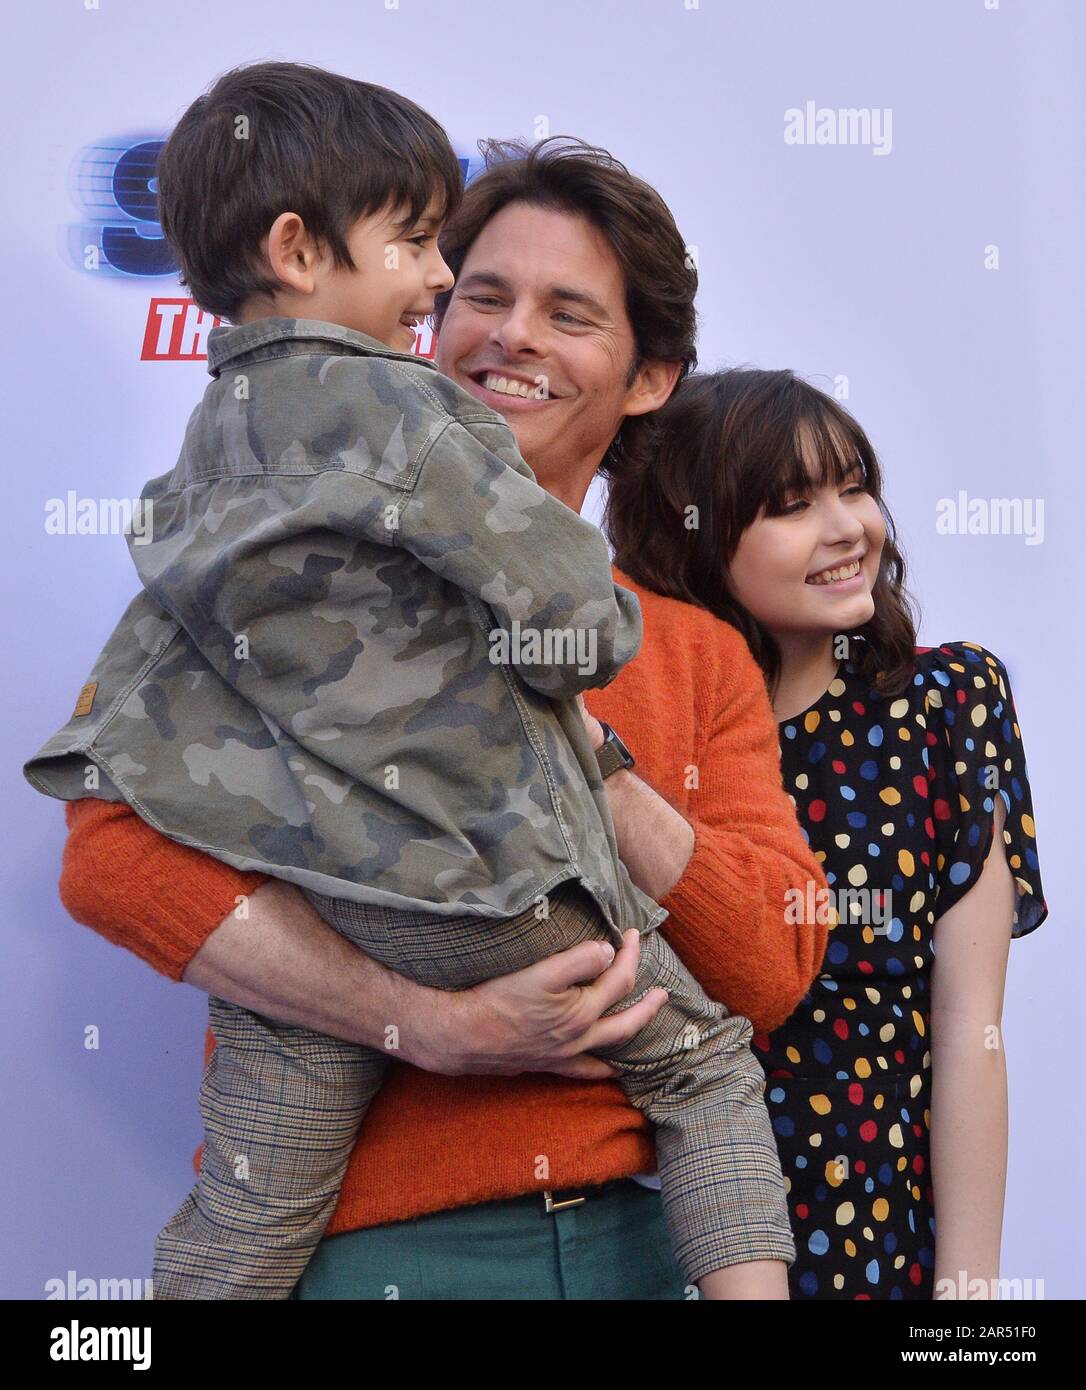 Cast member James Marsden and his children attend the 'Sonic the Hedgehog' family day event on the Paramount Pictures lot in Los Angeles on Saturday, January 25, 2020. Storyline: Based on the global blockbuster videogame franchise from Sega, 'Sonic the Hedgehog' tells the story of the world's speediest hedgehog as he embraces his new home on Earth. Photo by Jim Ruymen/UPI Credit: UPI/Alamy Live News Stock Photo